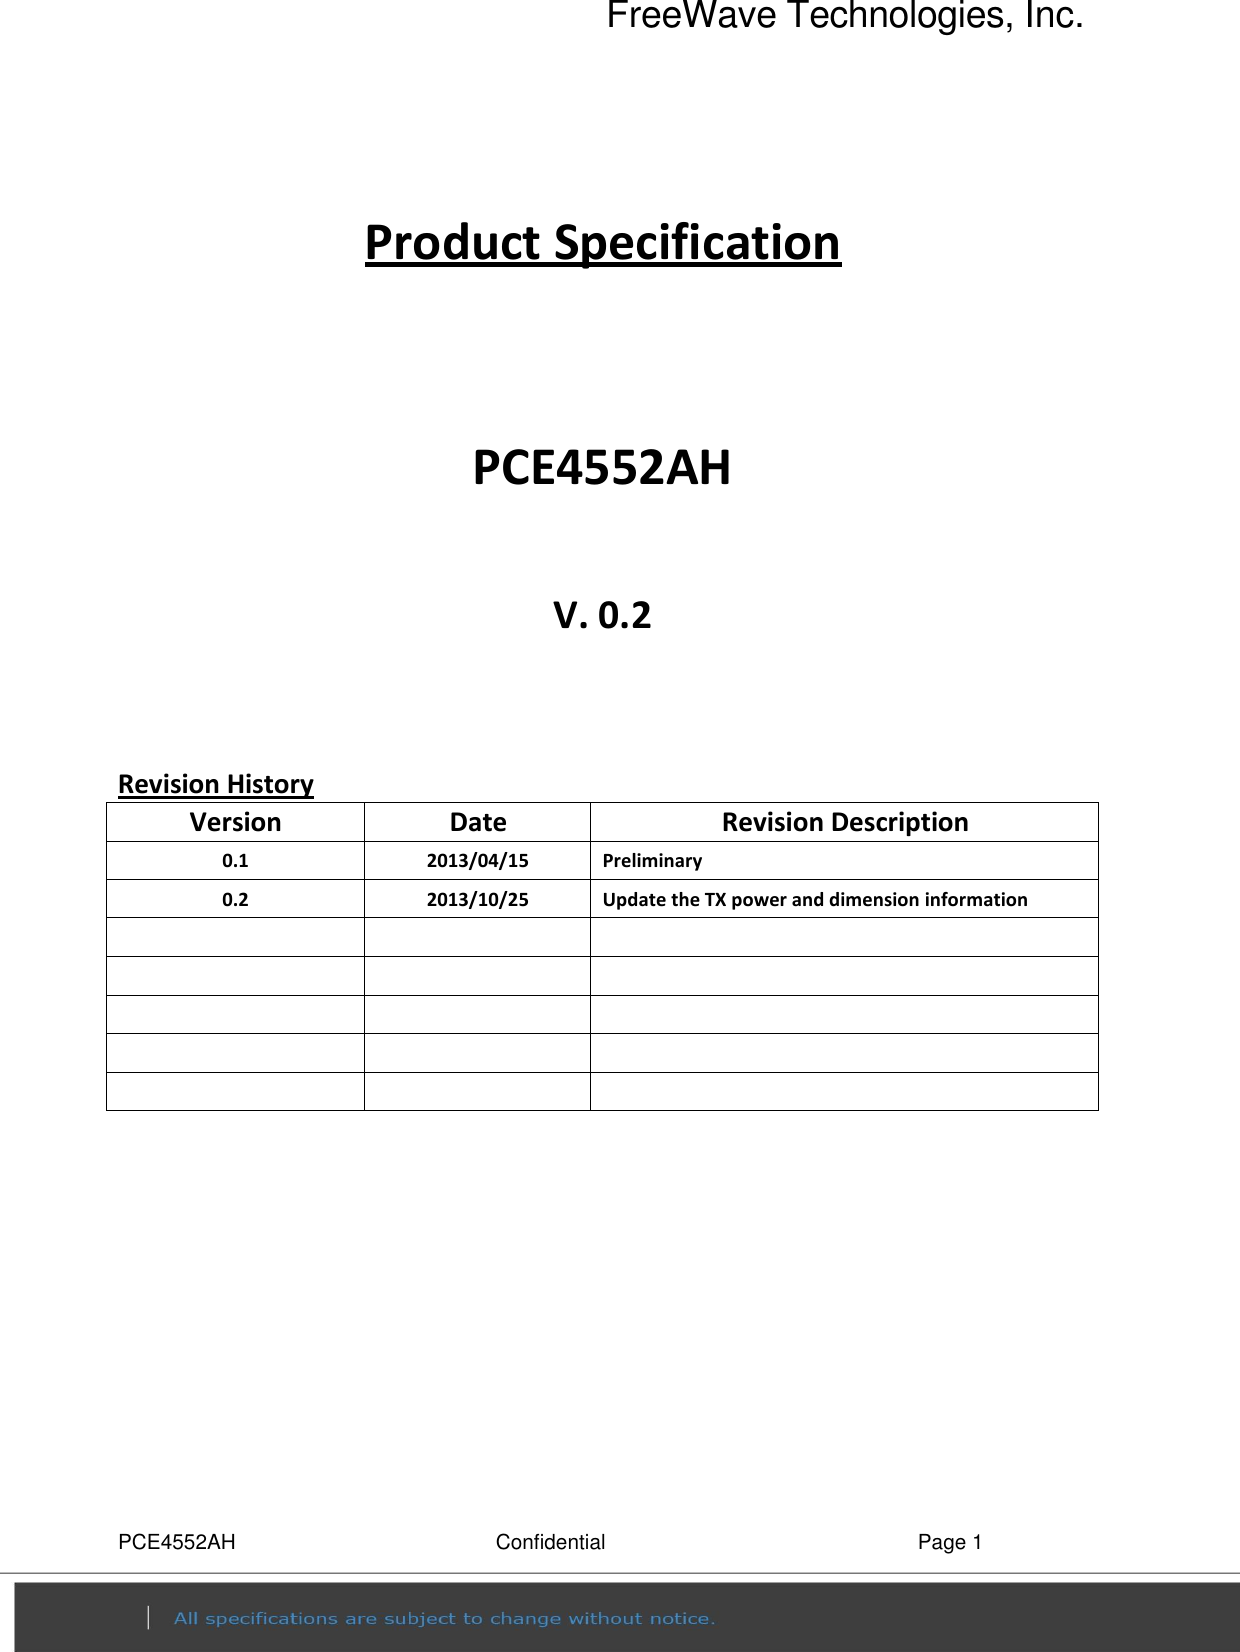 Page 1 of FreeWave Technologies PRW5000AC Wireless 802.11ac/b/g/n access point User Manual PCE4552AH specification v0 2